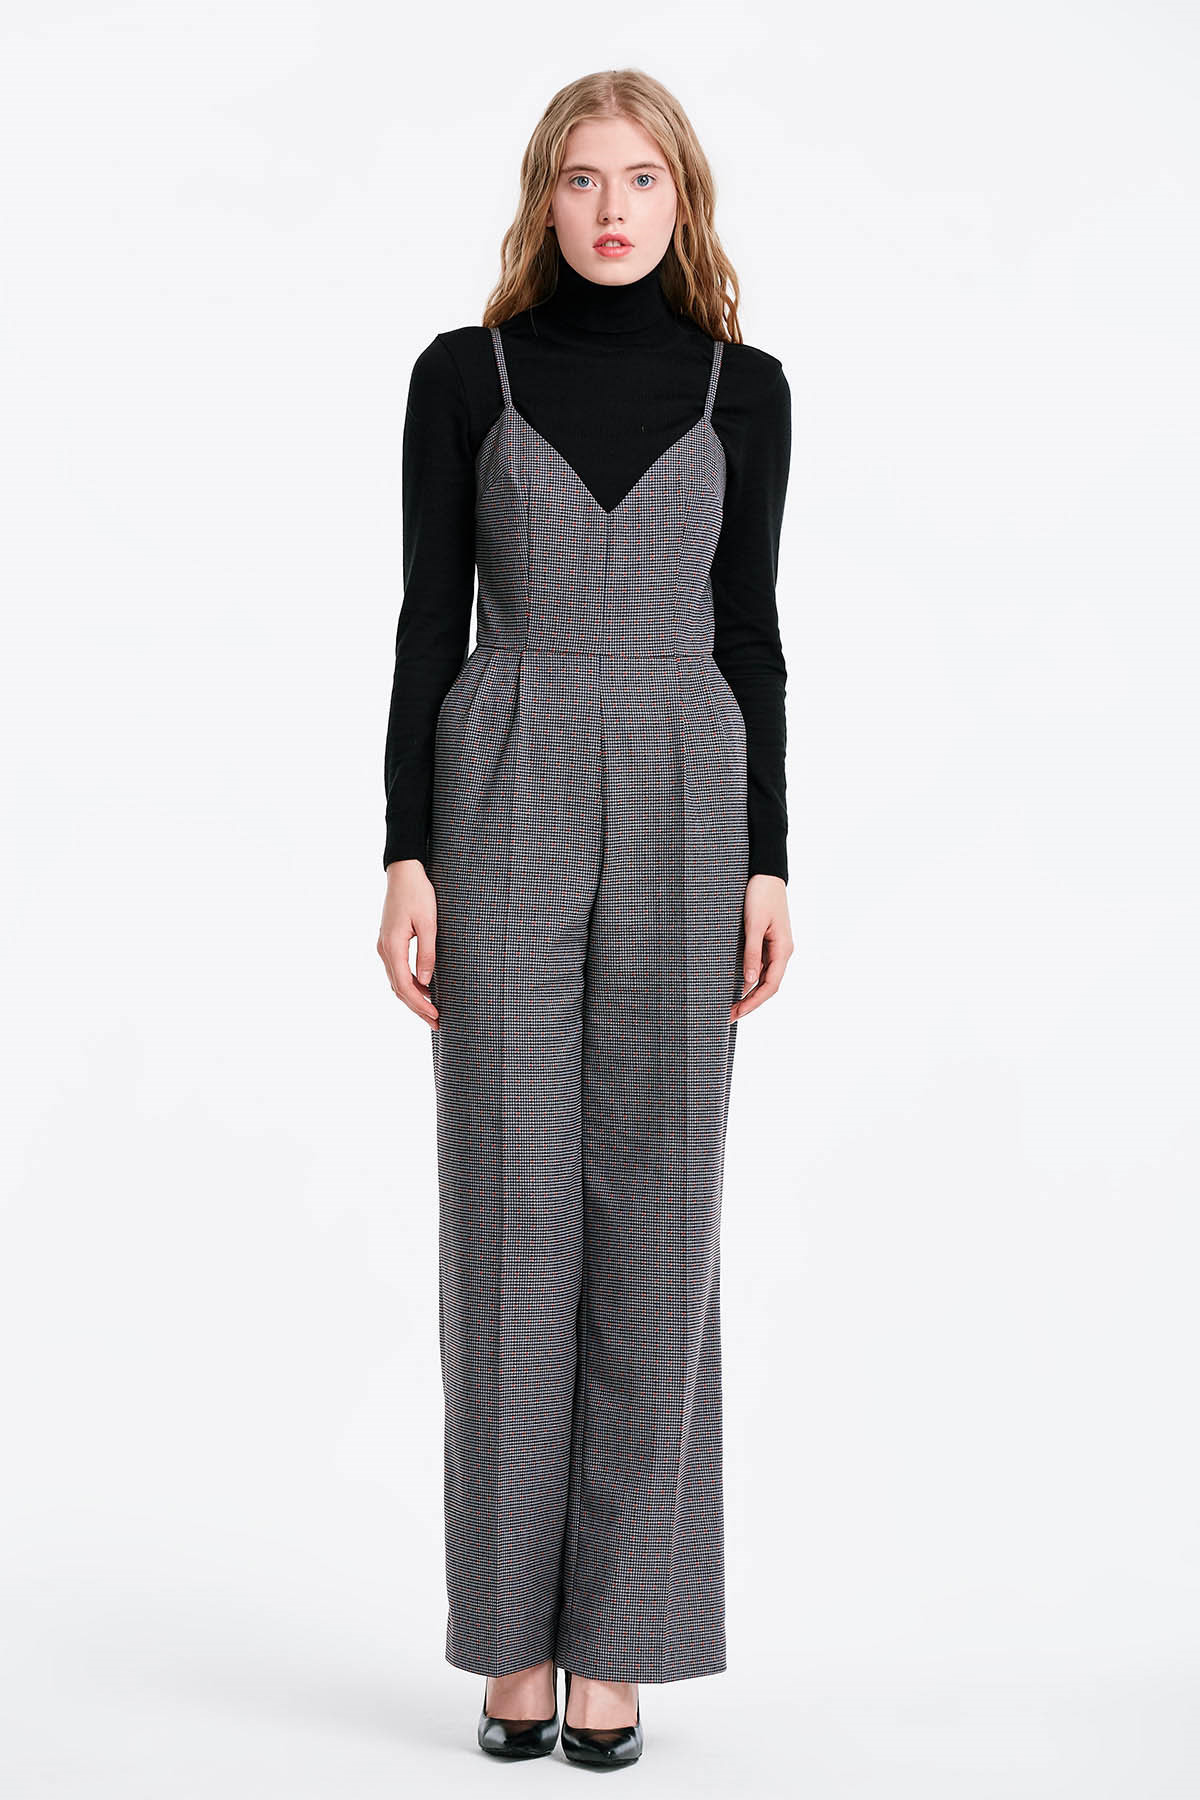 Grey jumpsuit with a houndstooth print, photo 1